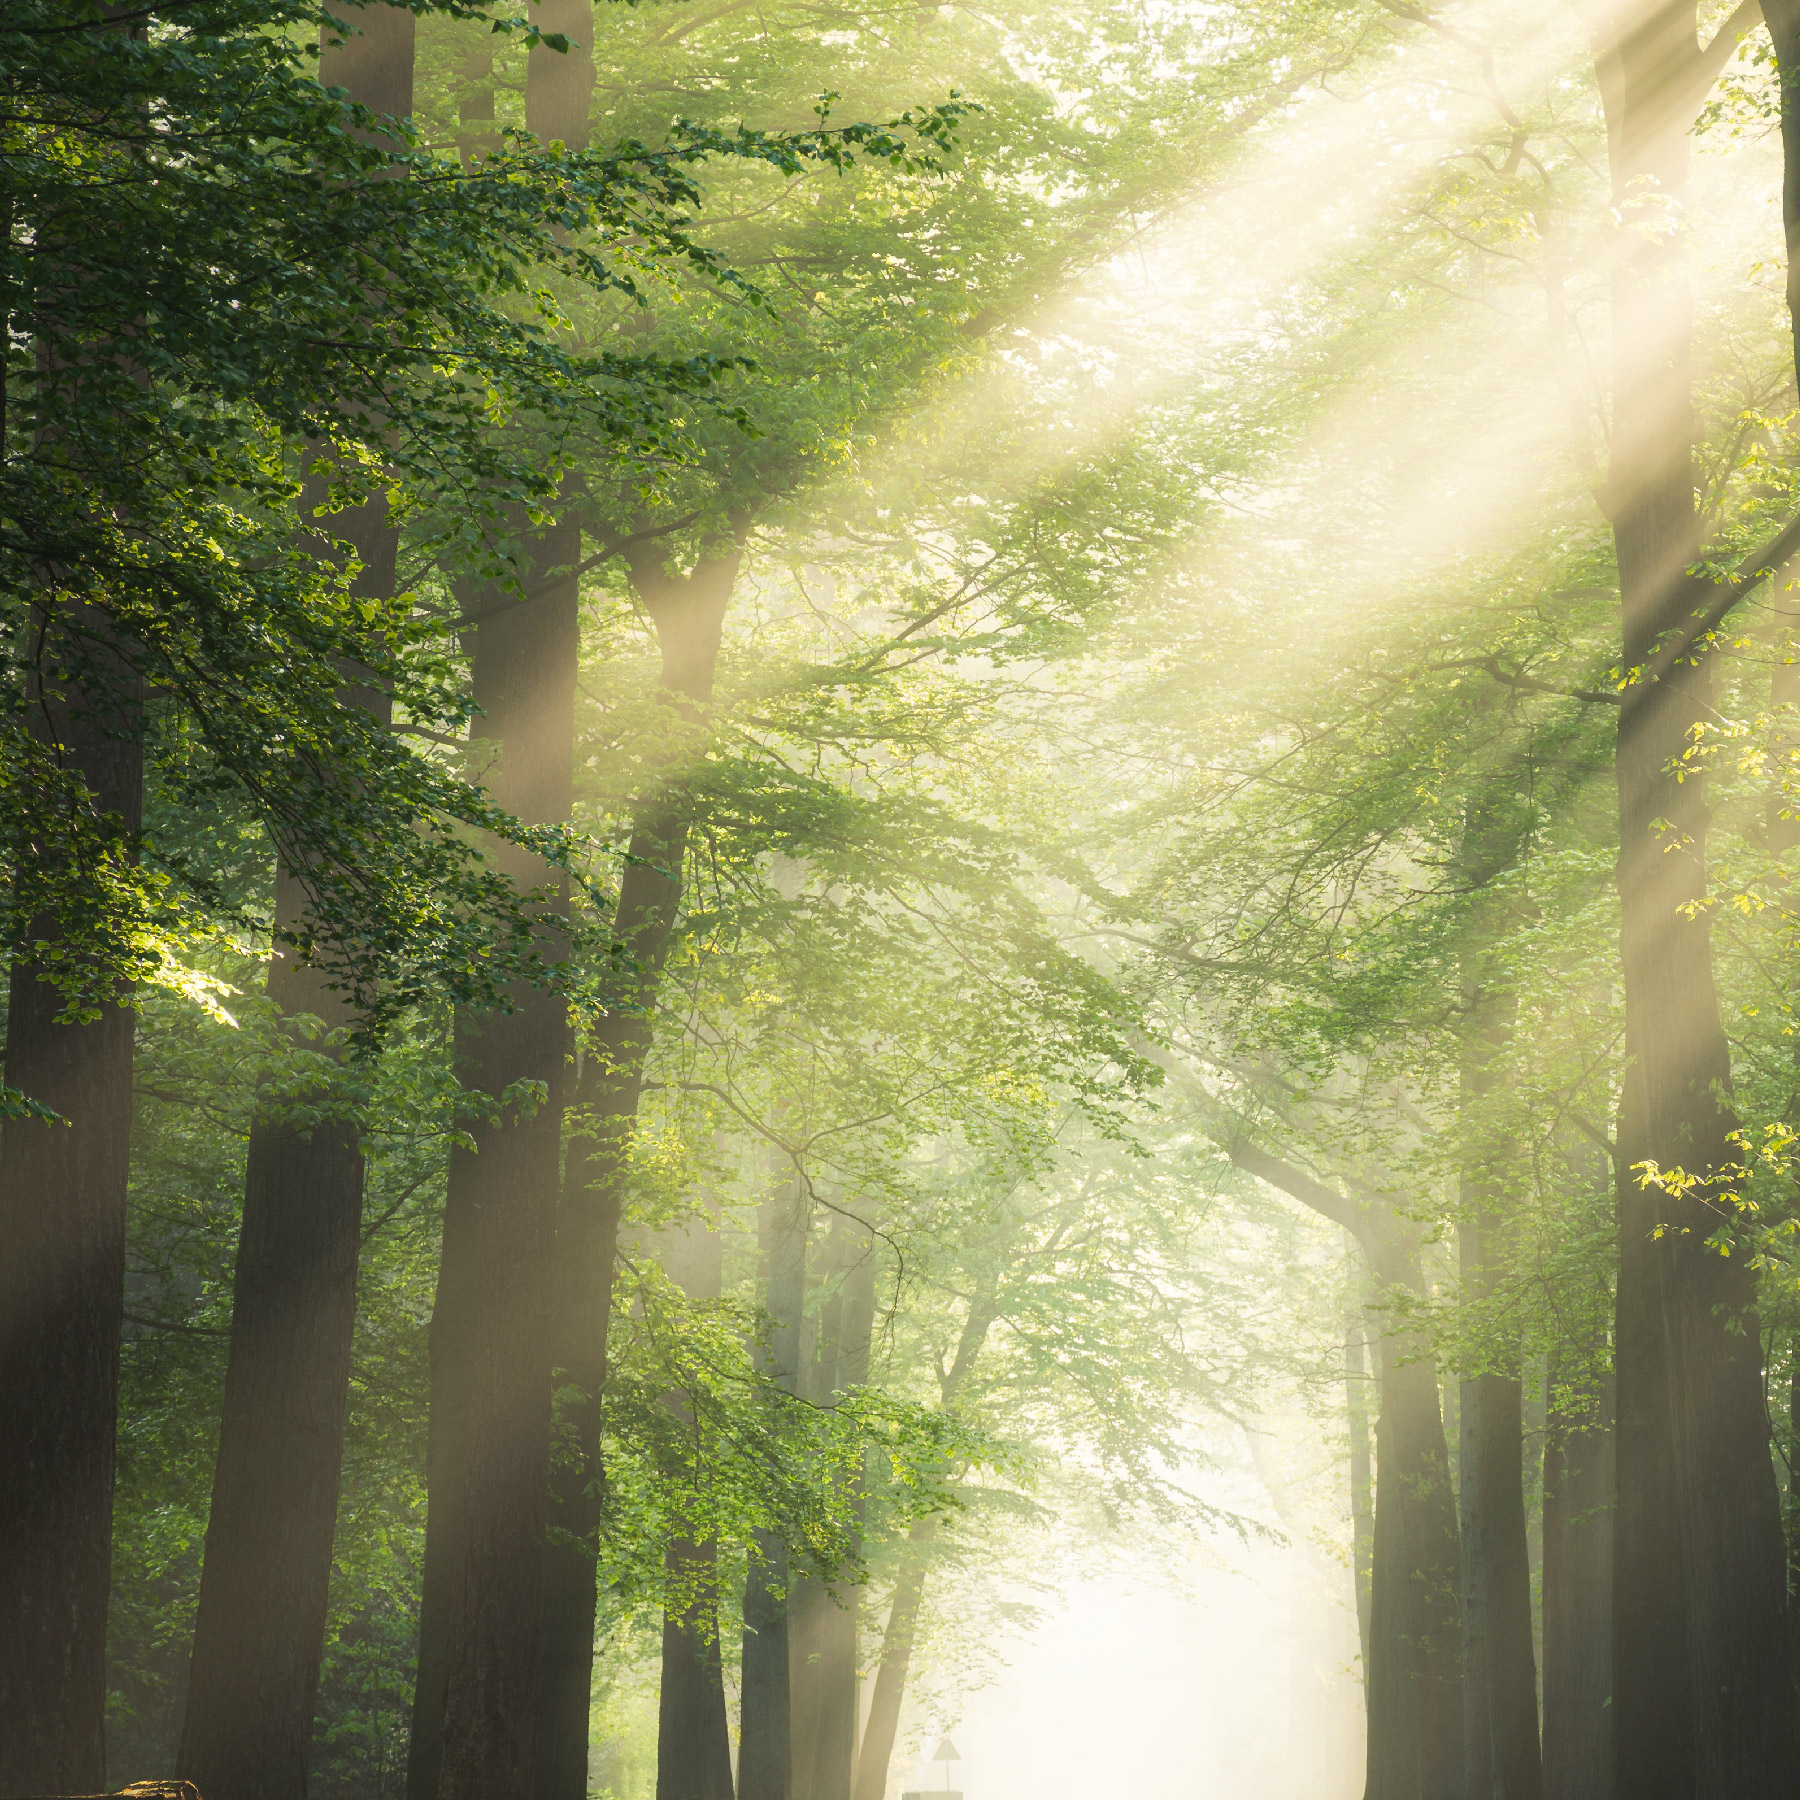 Forest with sun peaking through leaves